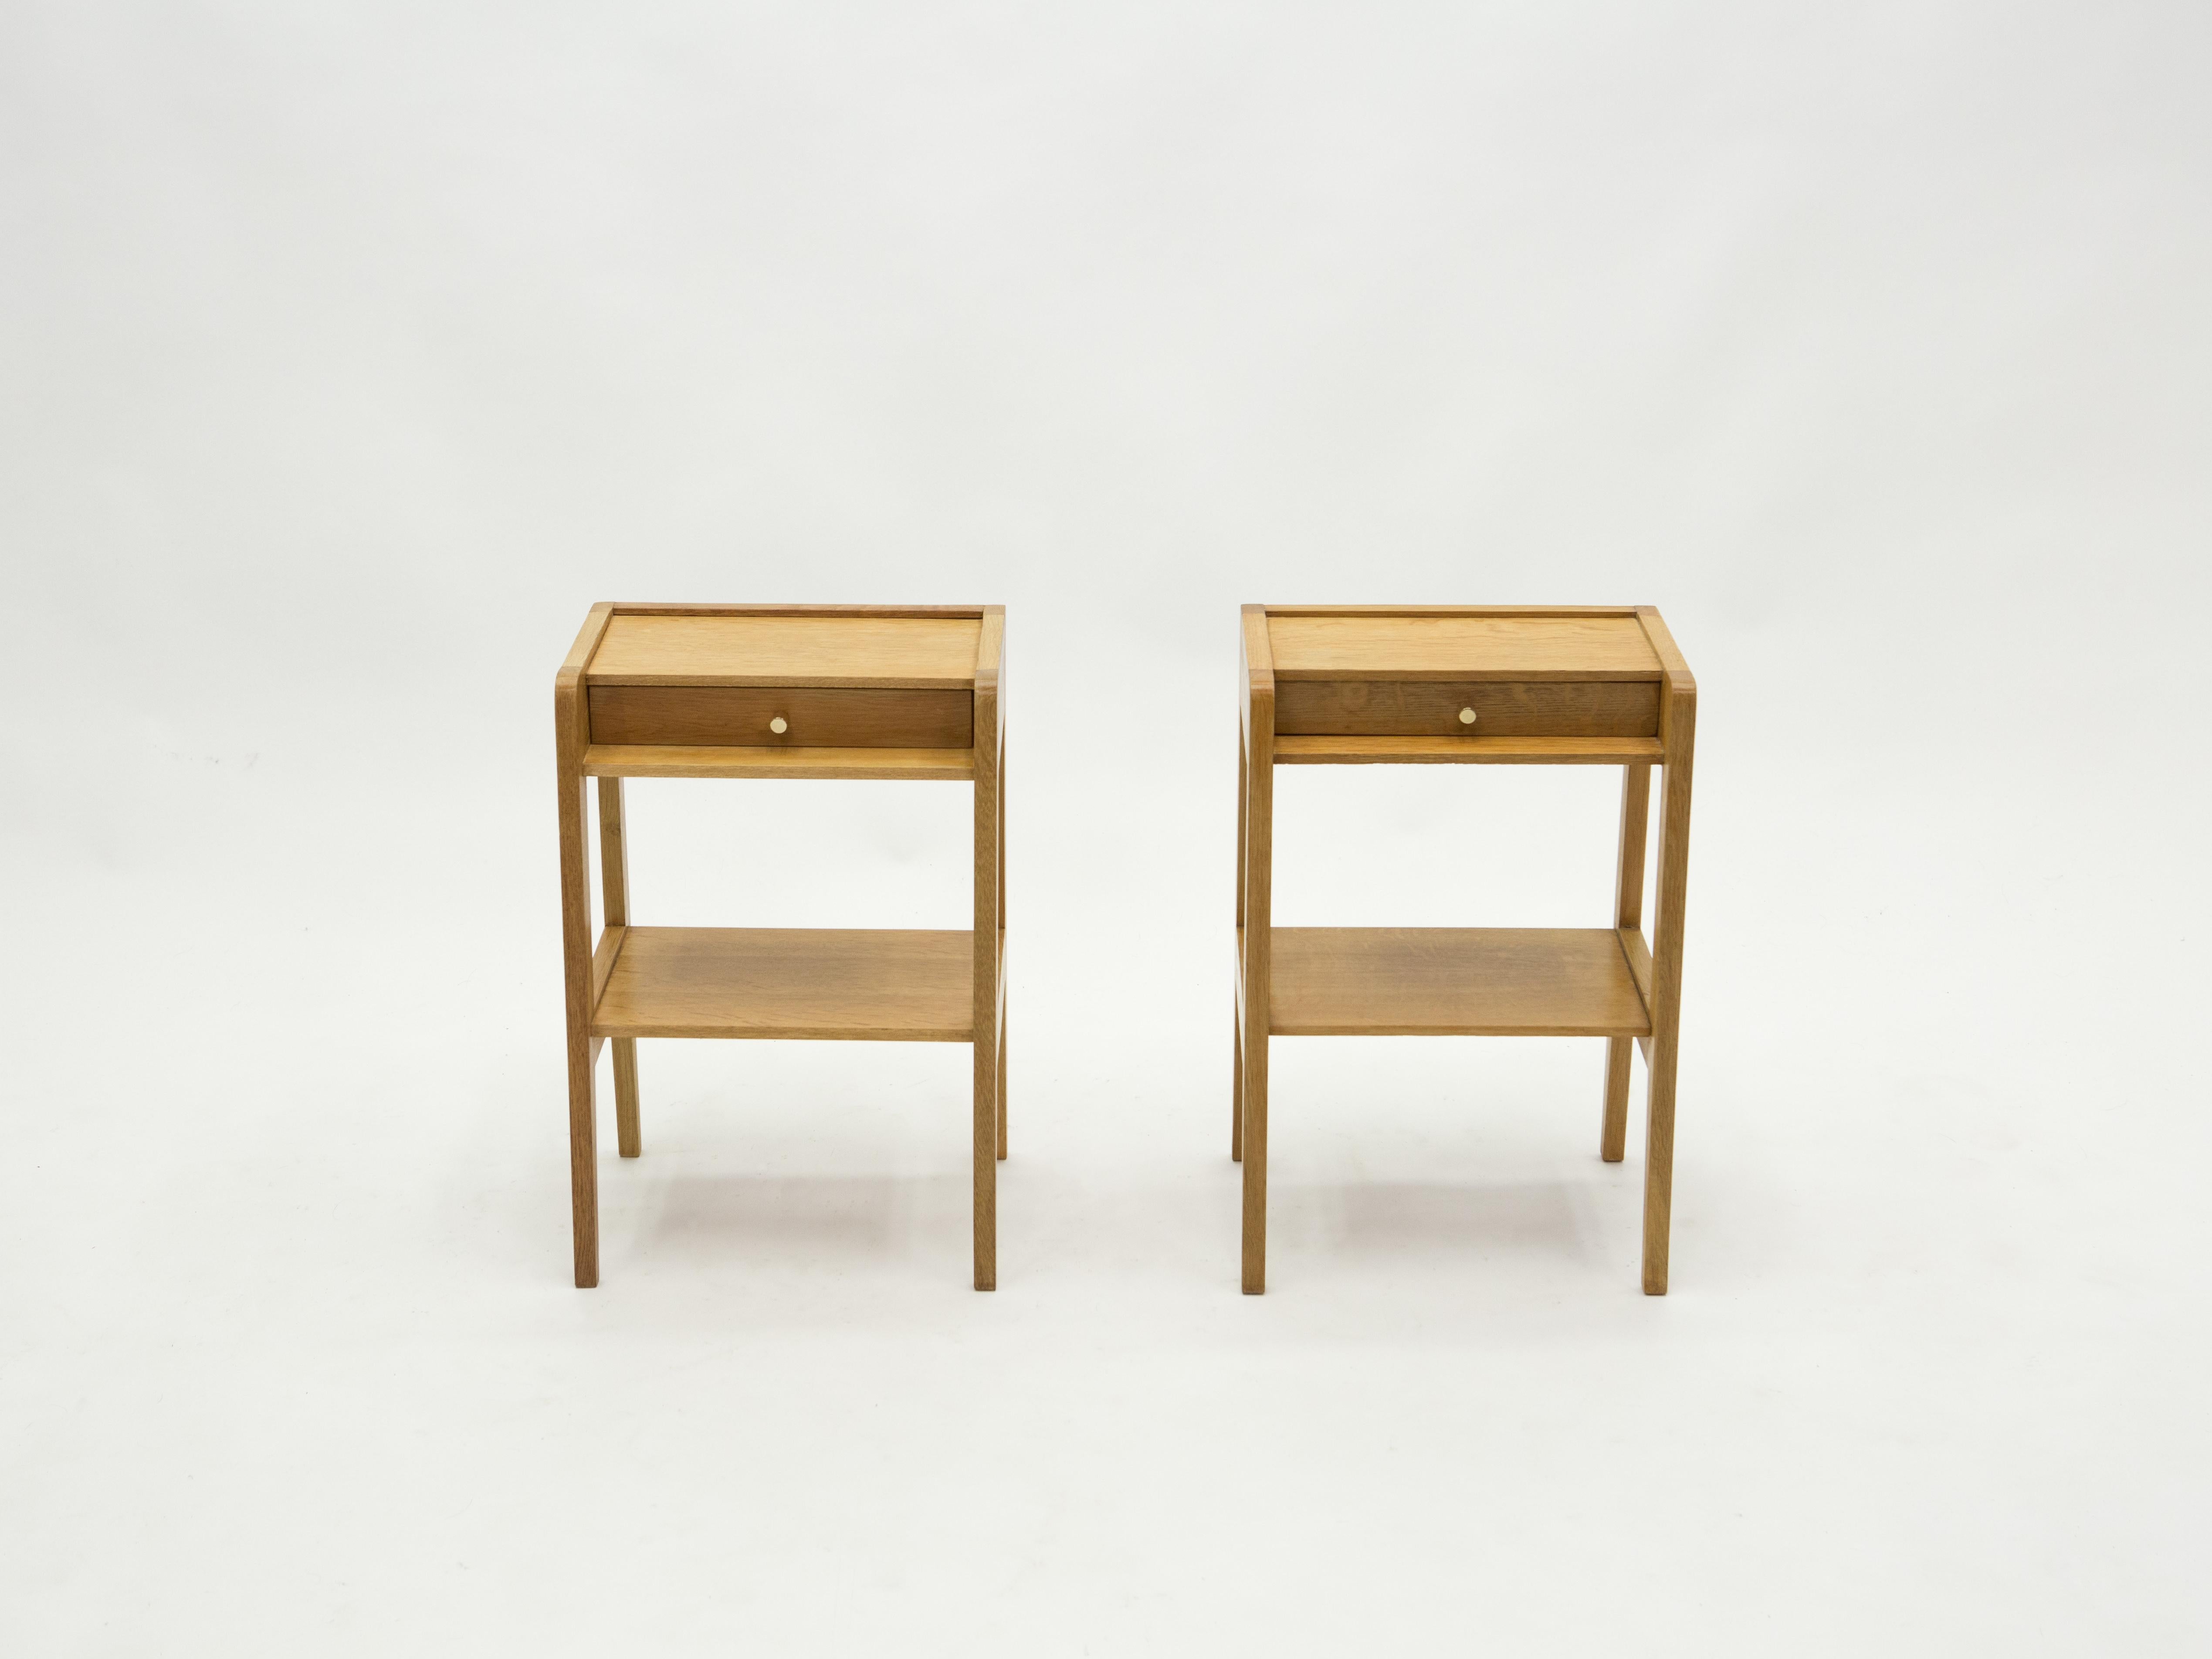 This pair of small lined and elegant modernist nightstands is made from oakwood in France in the early 1950s. Vintage and typically French post Art Déco modernism, they feature nice small brass handles and a nice two-tiered design. They have been